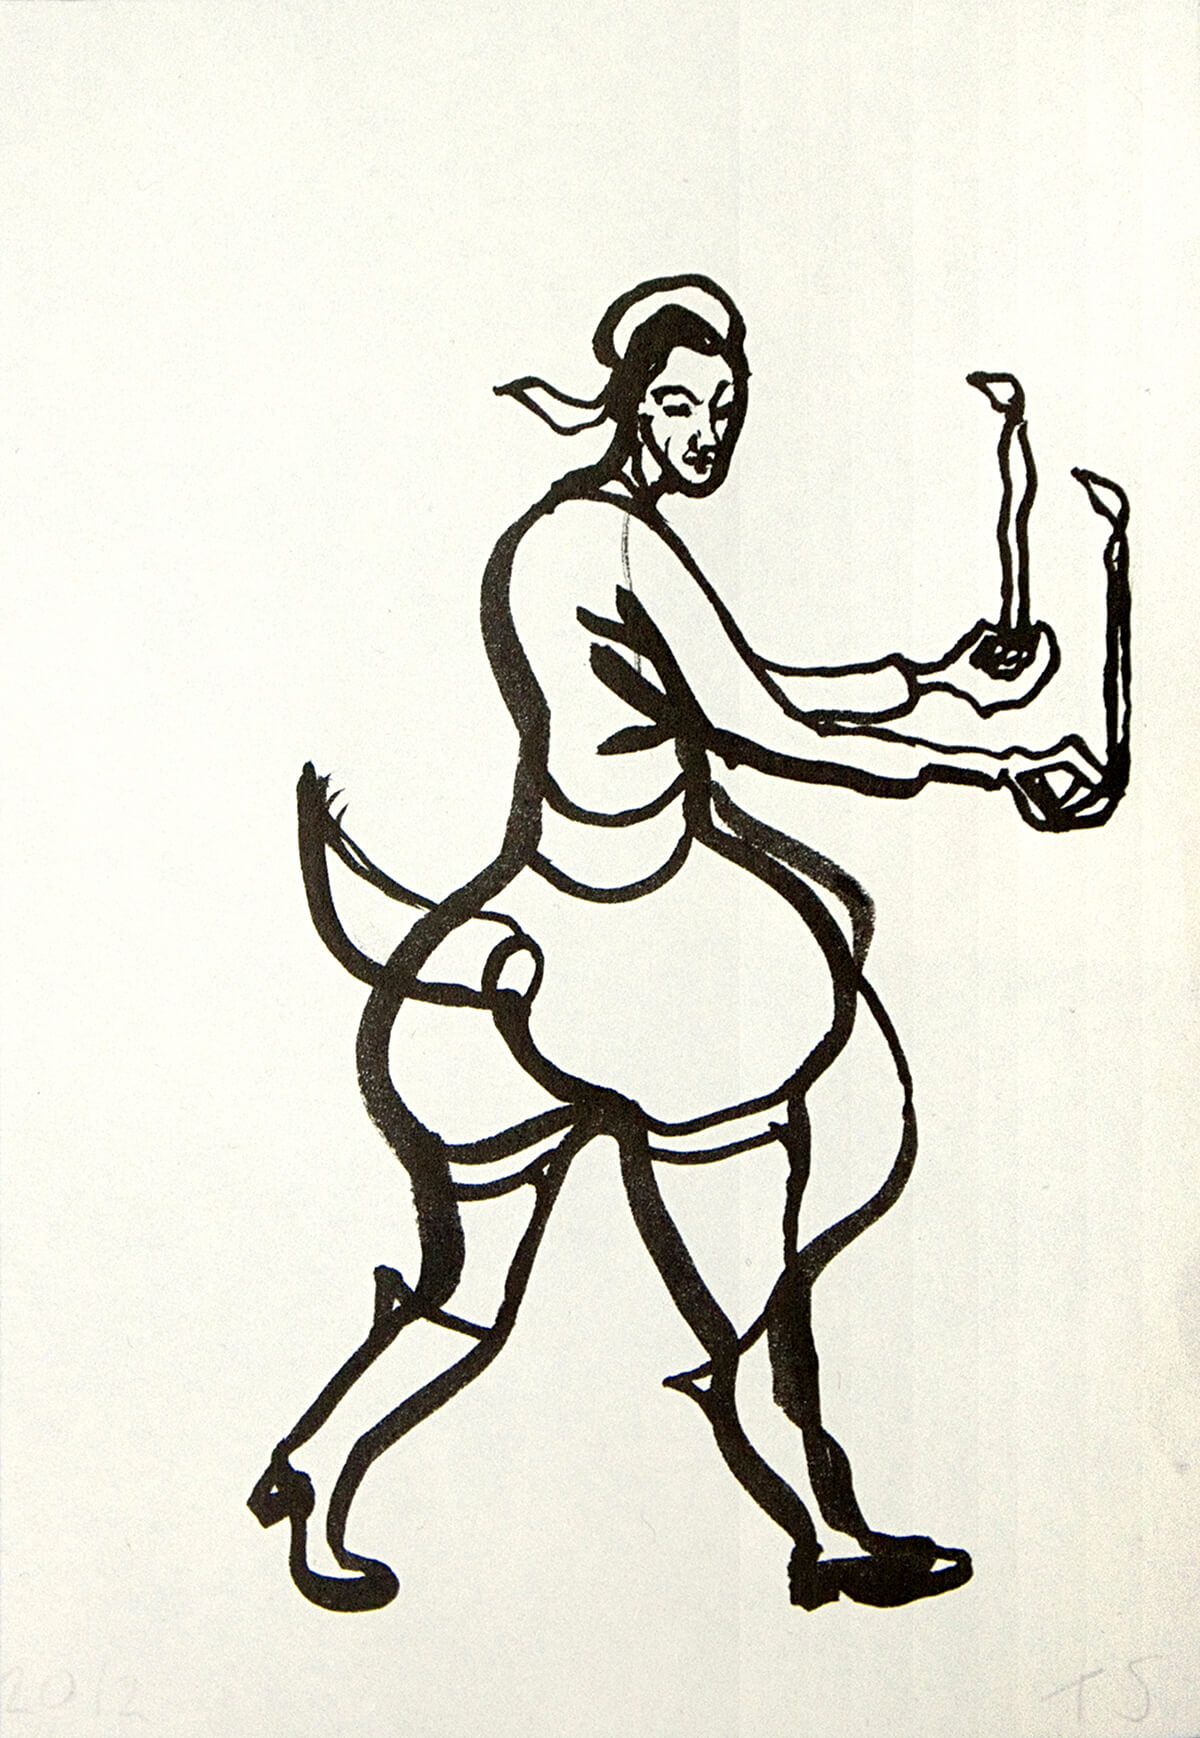 untitled (carrying candles), 16 x 11 cm, ink on paper, 2012